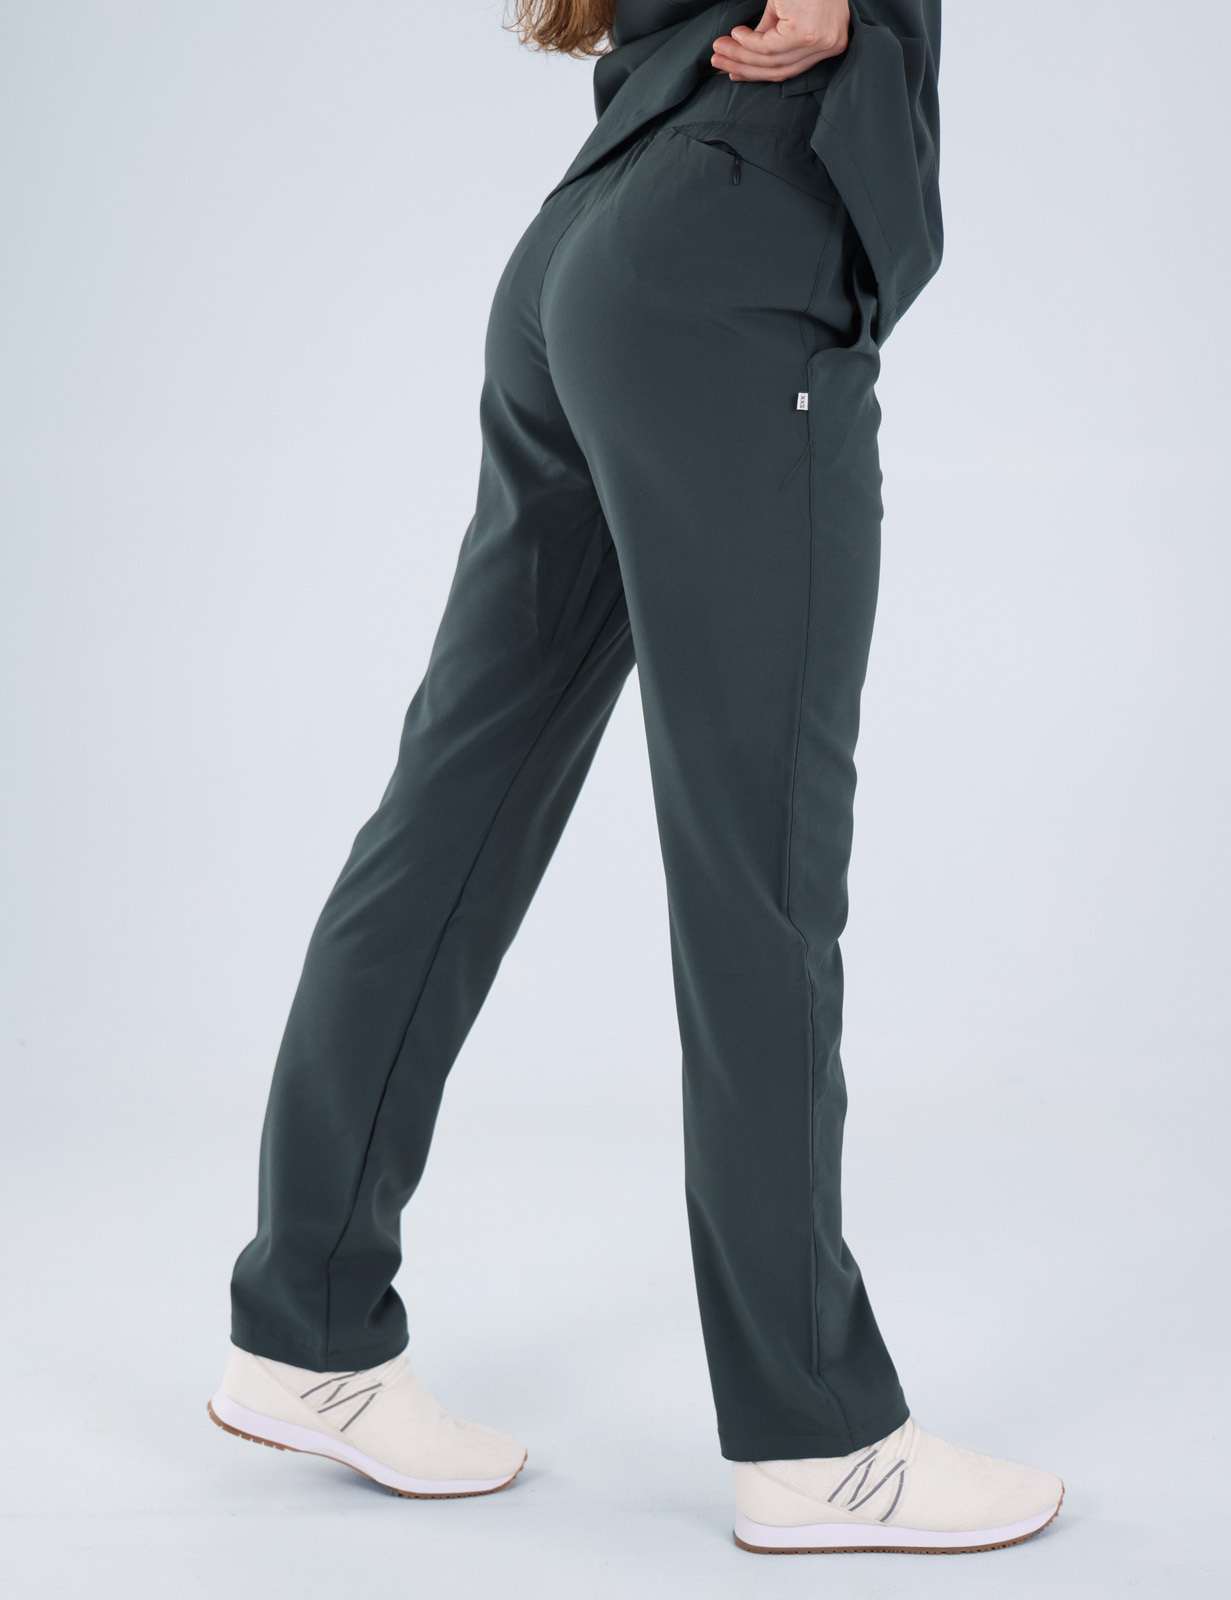 Anon Women's Scrub Pants (Whisper Collection) Poly/Spandex - Forest Green